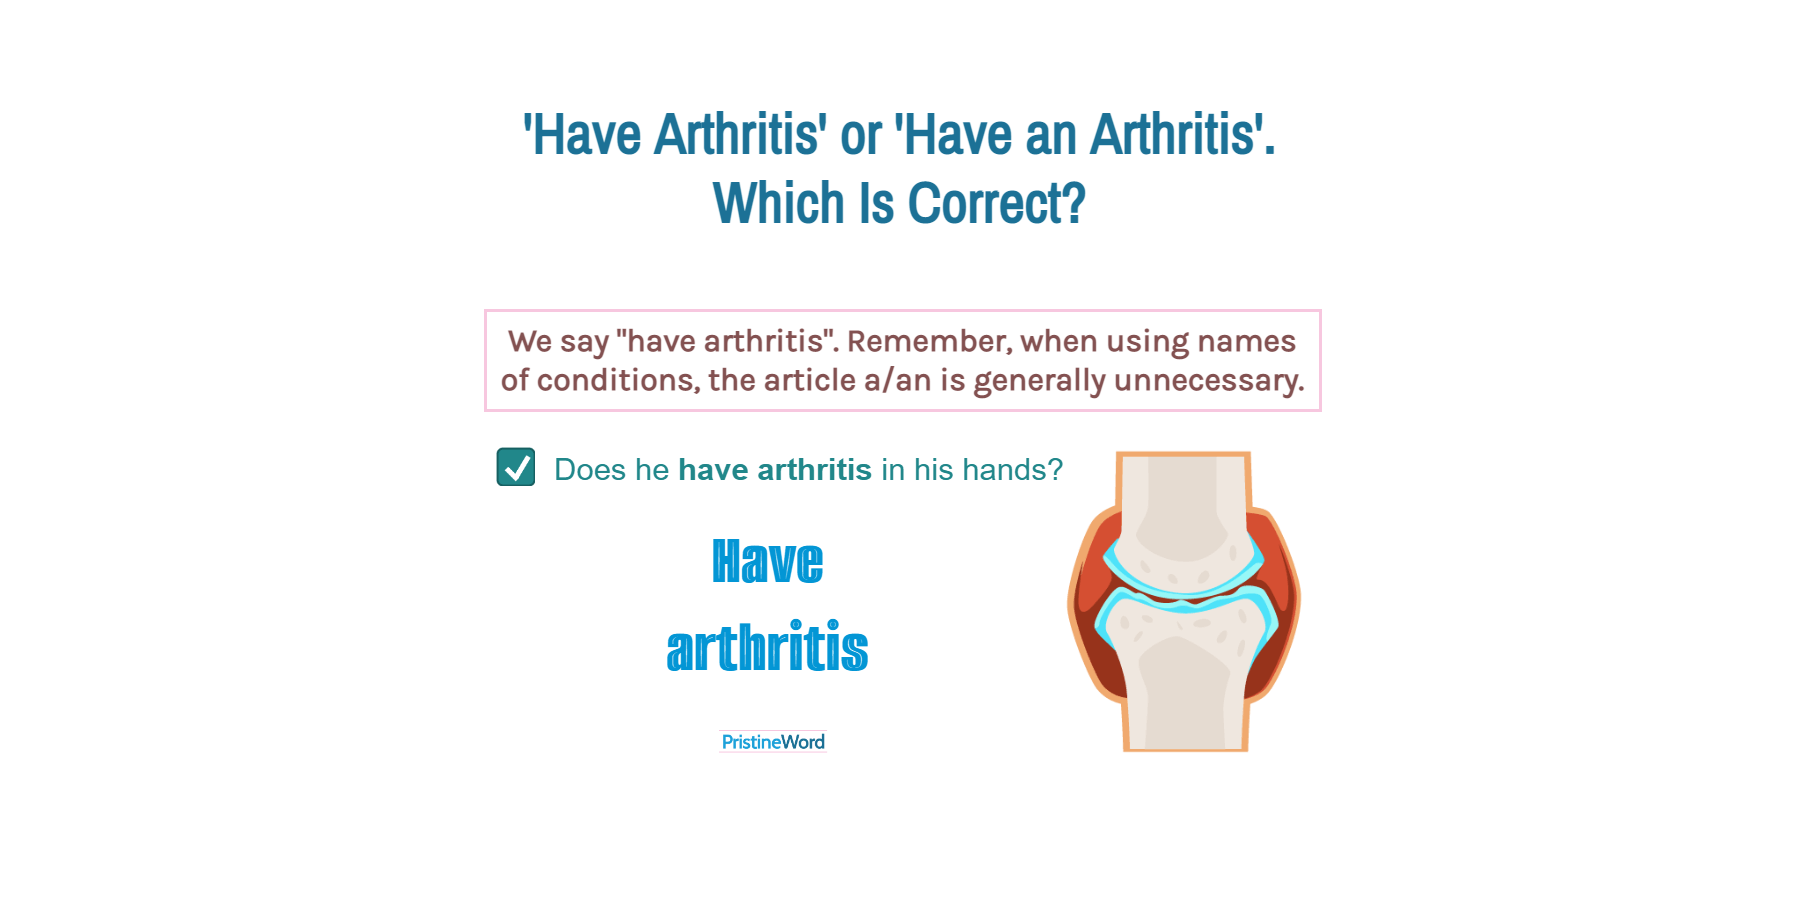 Have Arthritis or Have an Arthritis. Which Is Correct?